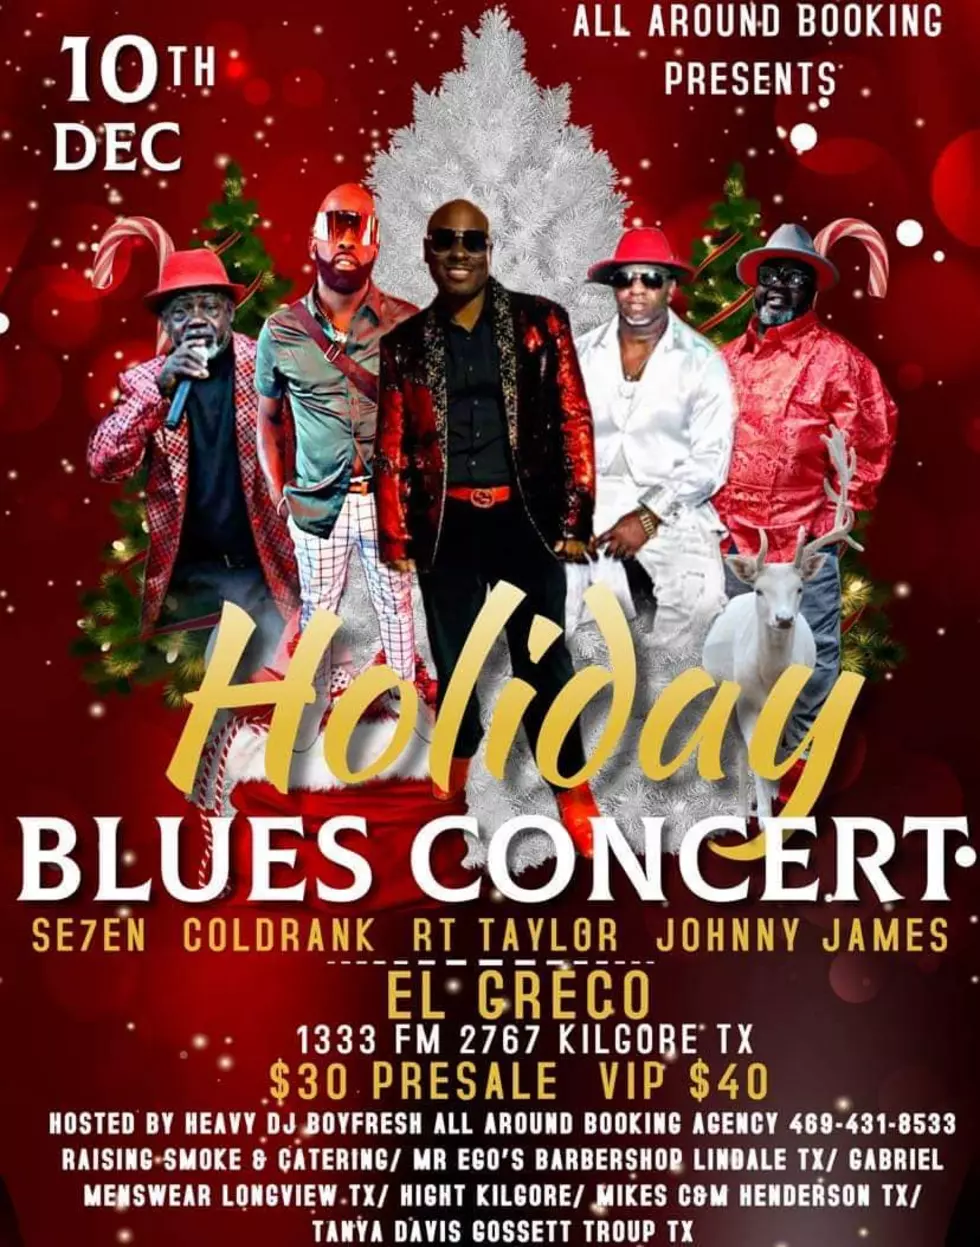 Win Your Way In To The Holiday Blues Concert Coming To Kilgore, TX